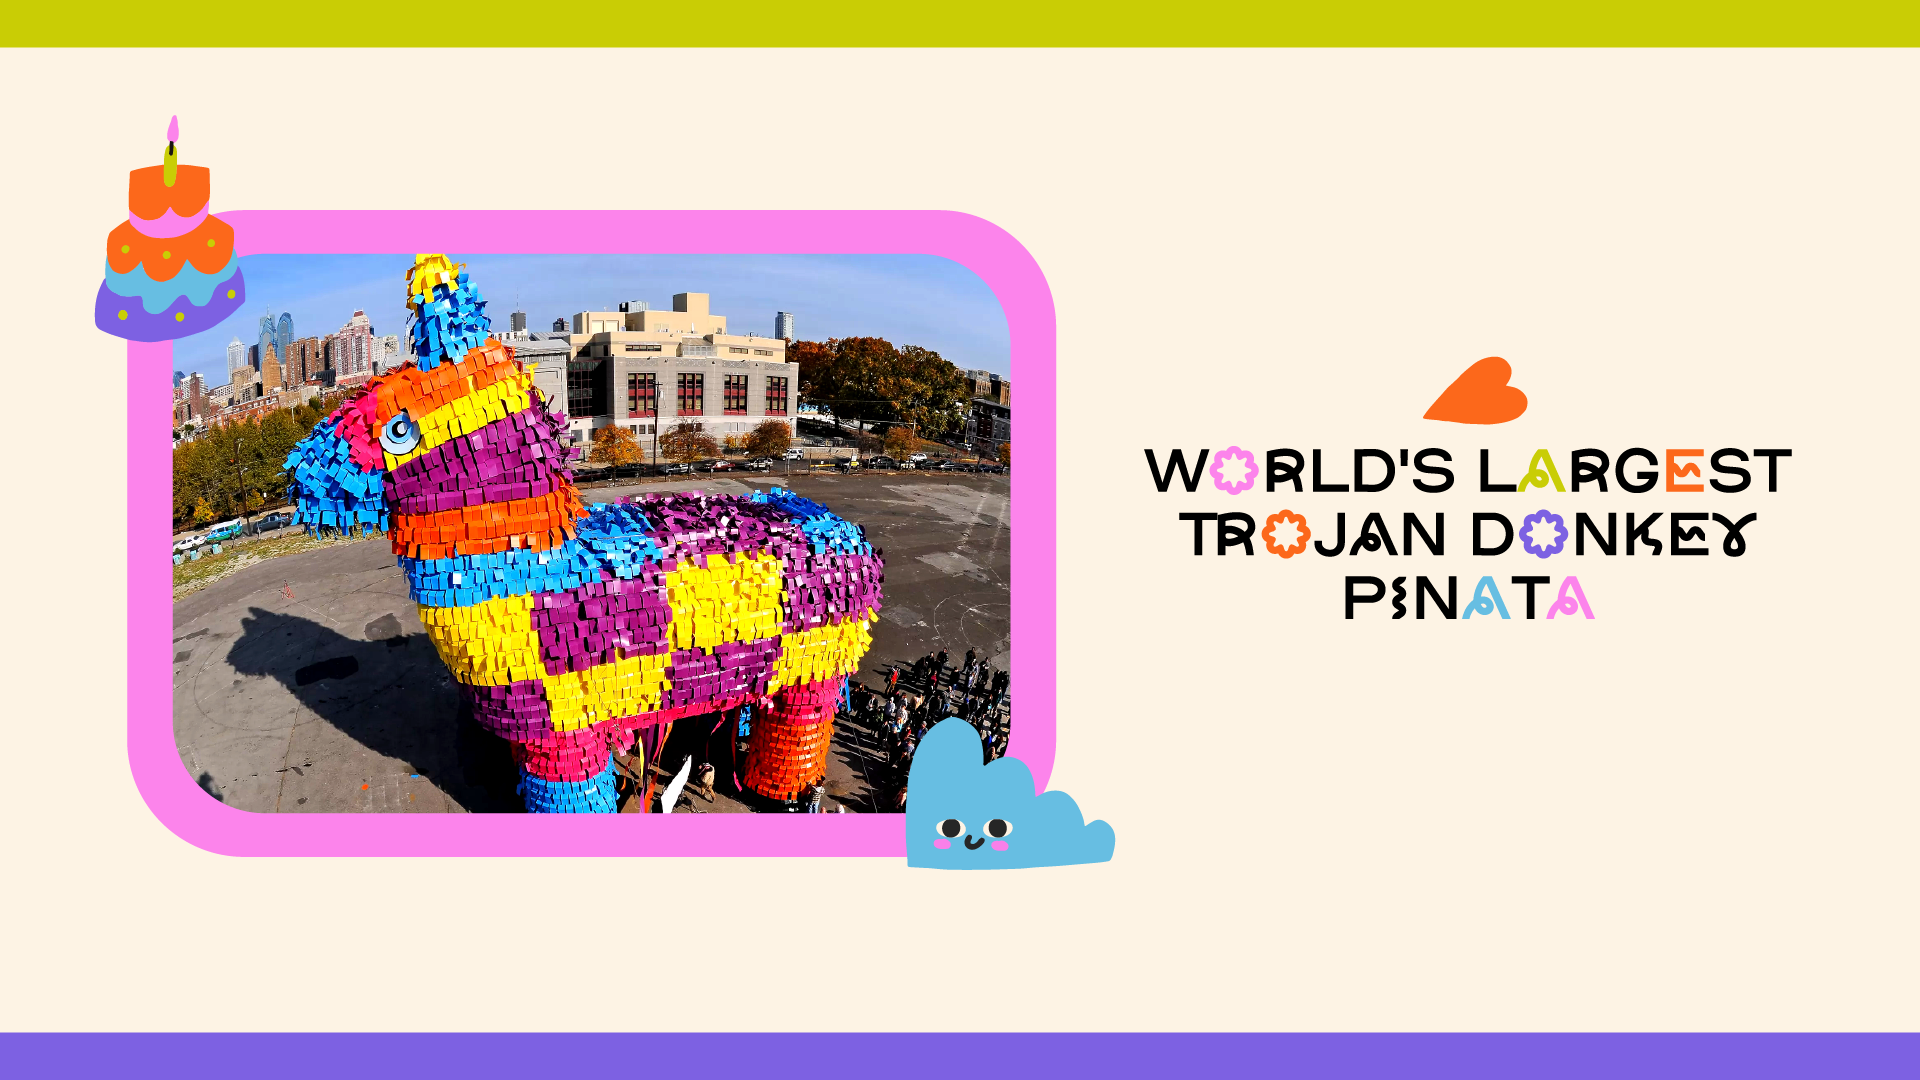 TROJAN HORSE PINATA, CREATED BY CARNIVAL CRUISE LINES